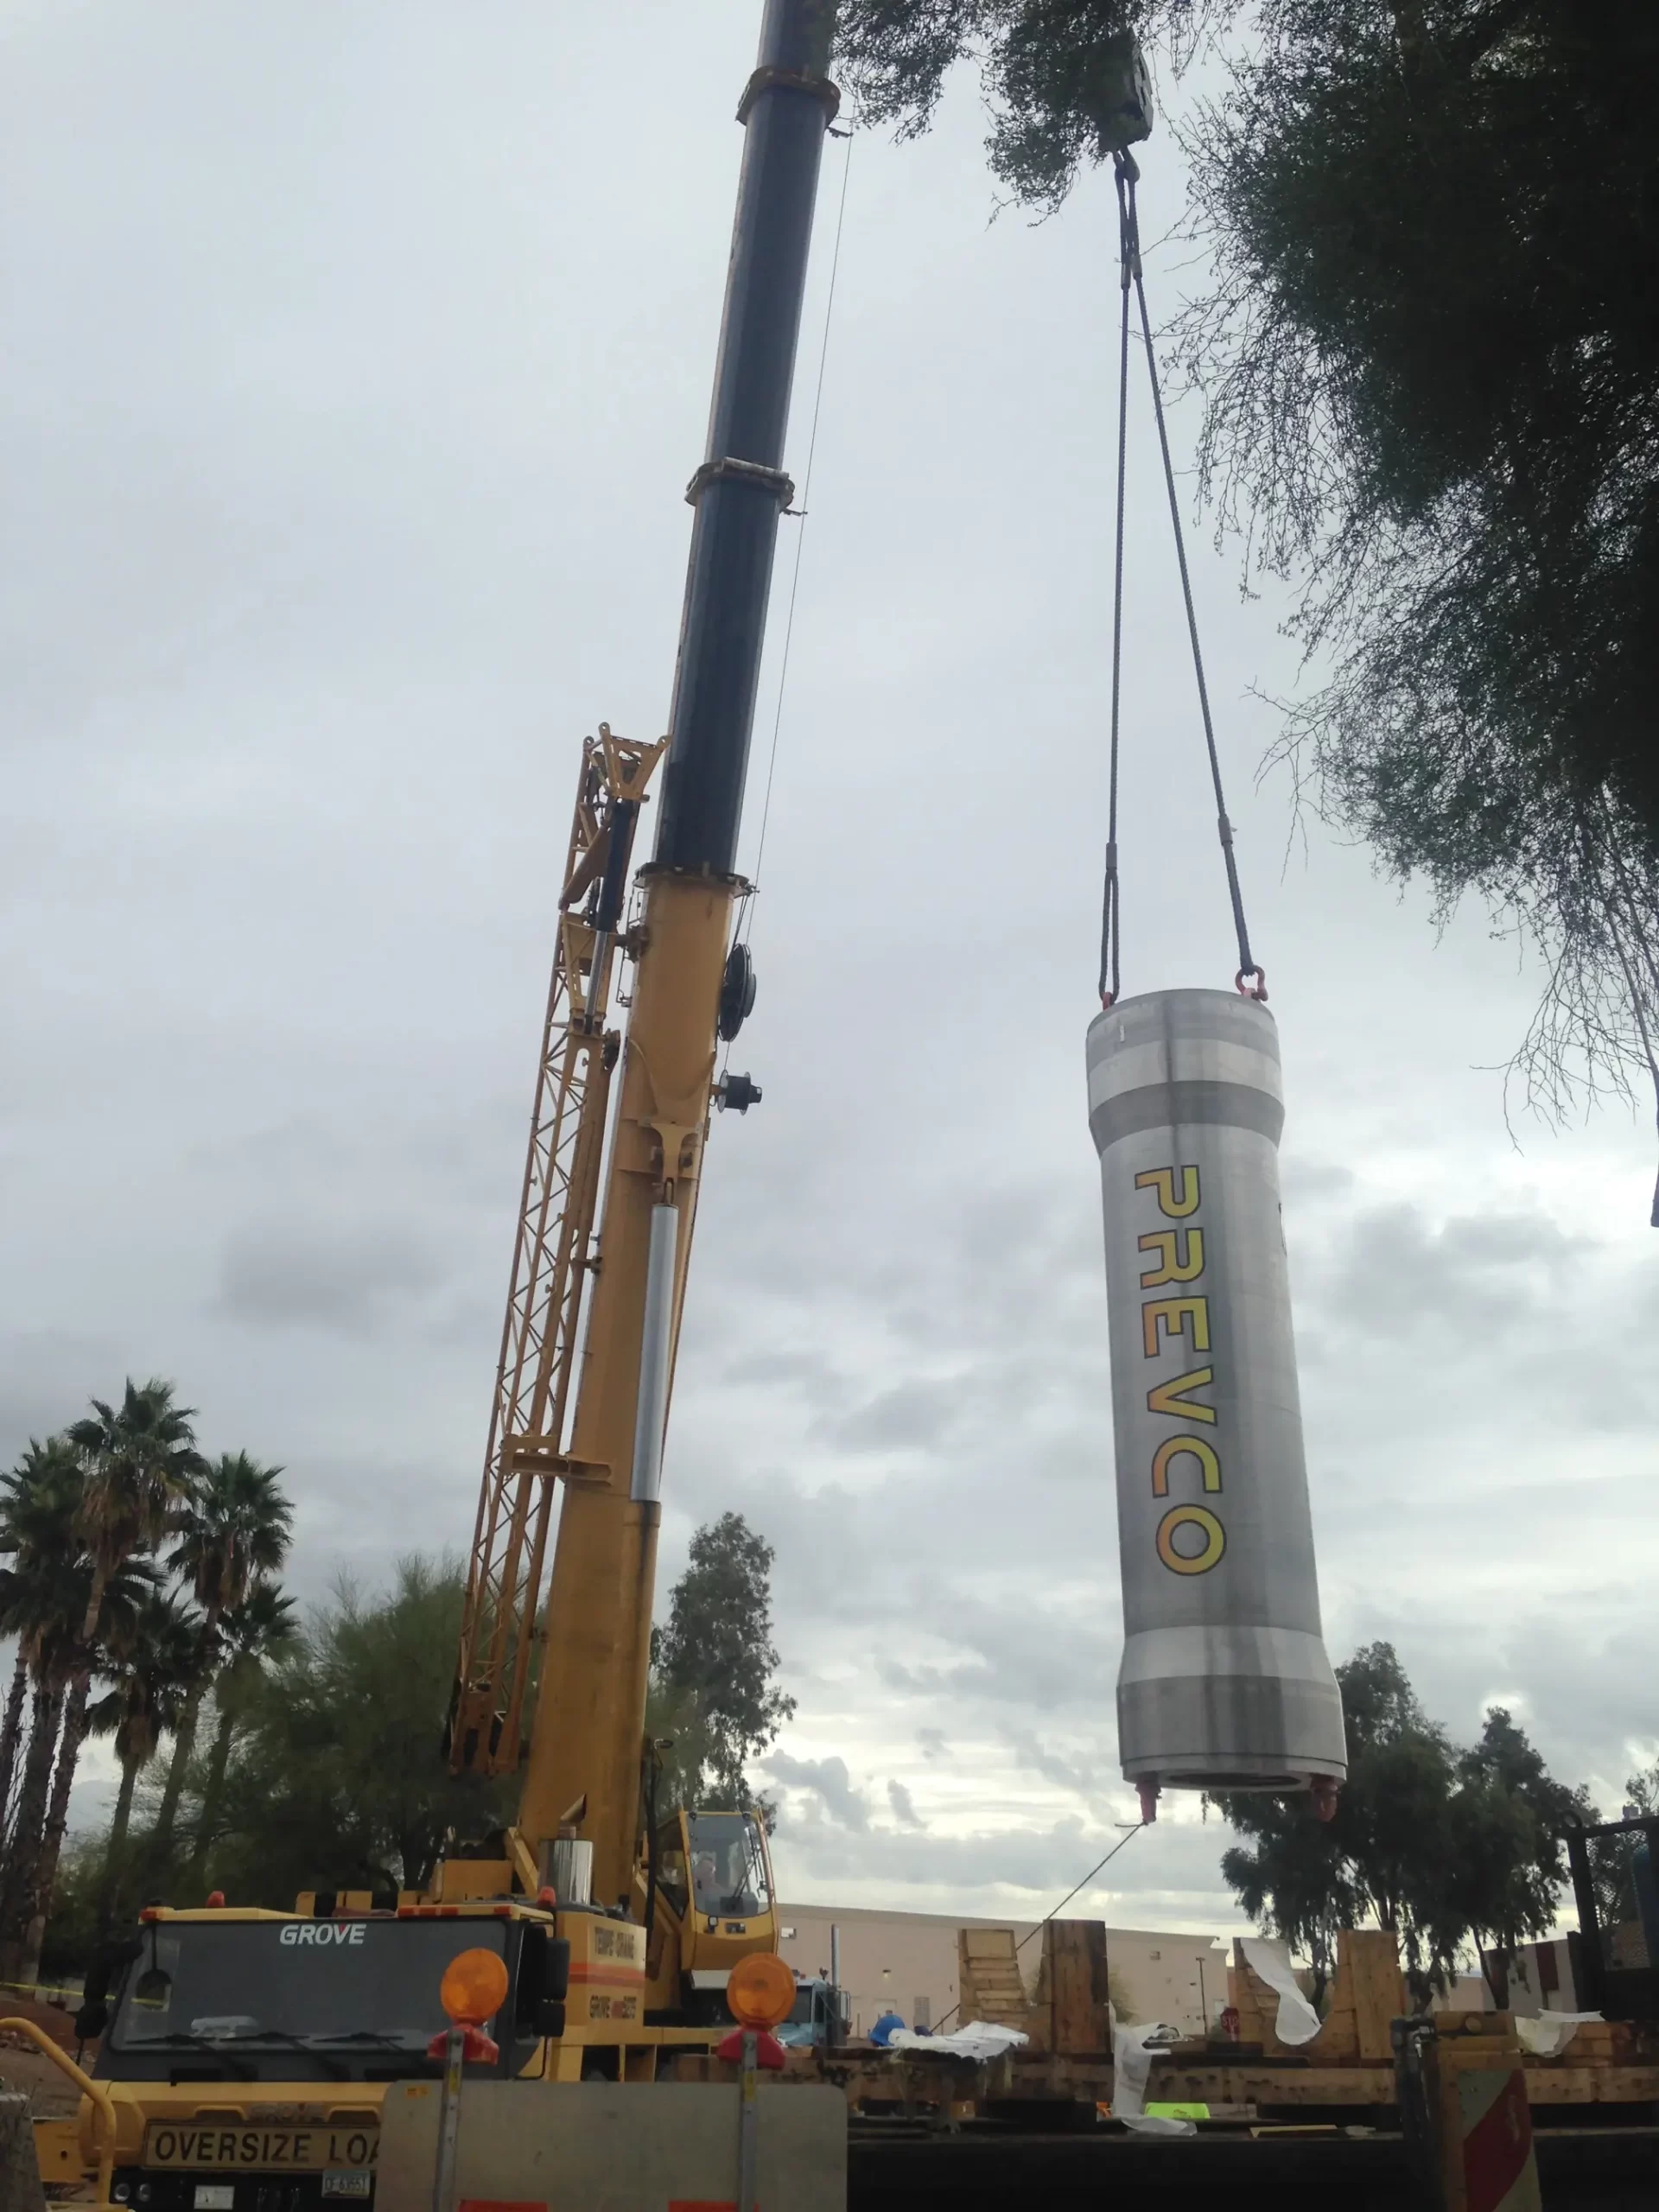 Dual cranes collaborate to maneuver a piece of specialized industrial equipment, showcasing operational synergy.